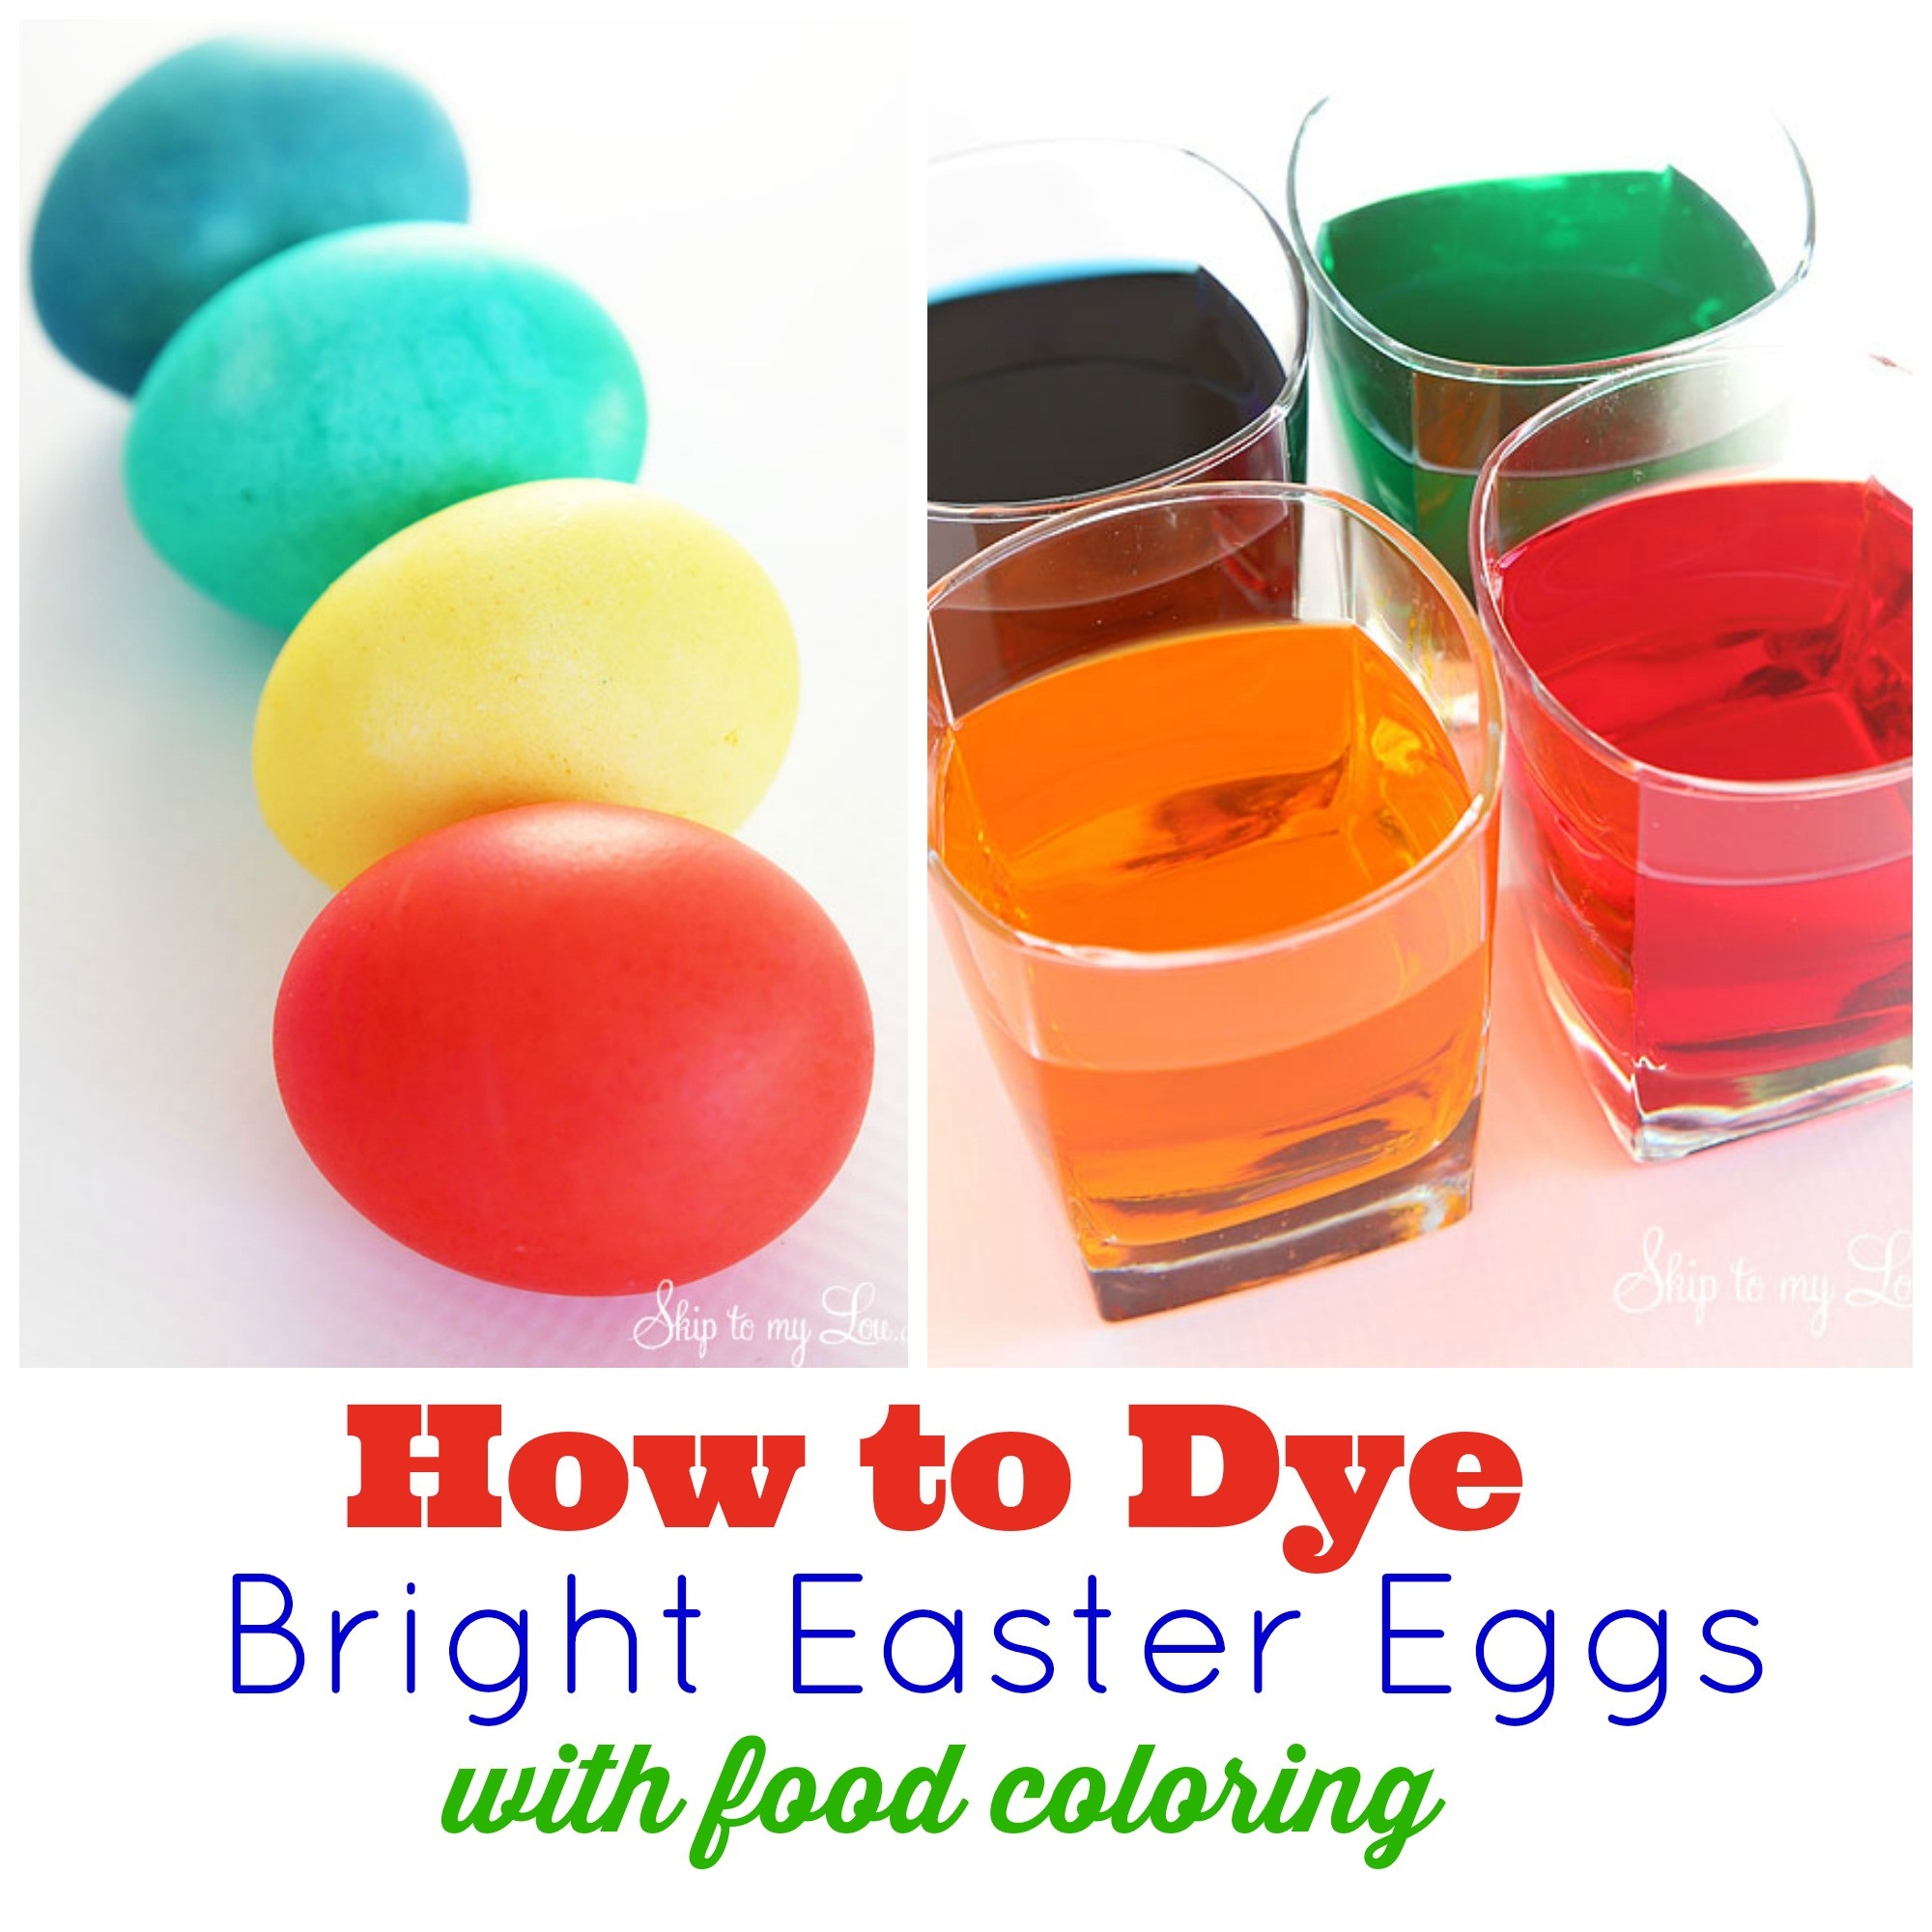 Coloring Easter Eggs with Food Coloring Elegant How to Dye Eggs with Food Coloring